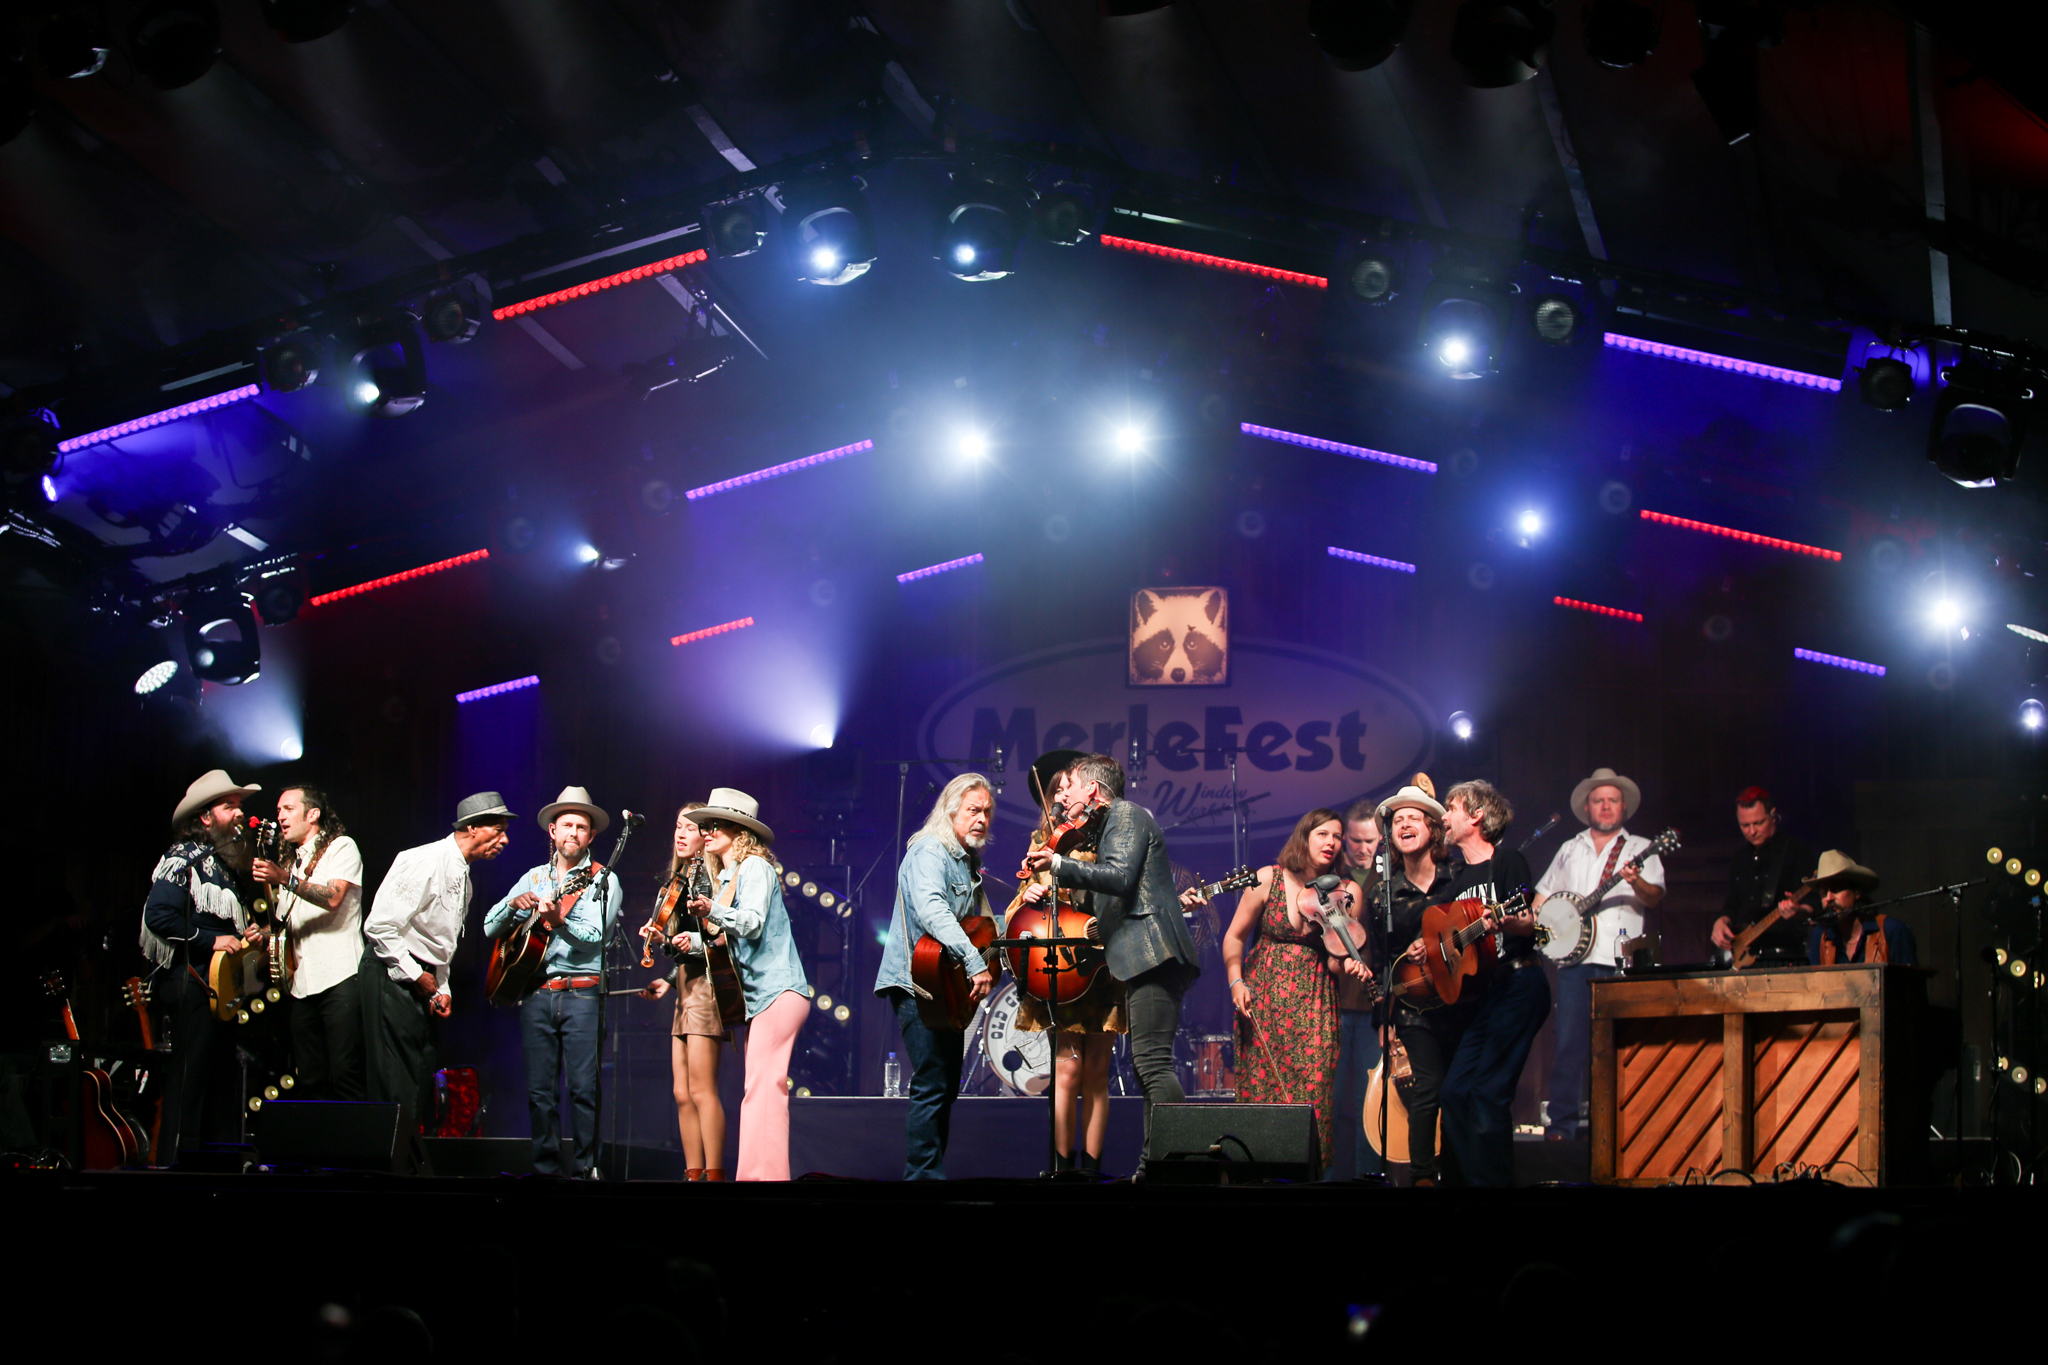 Old Crow Medicine Show brings up many performers to close out the first night at Merlefest.